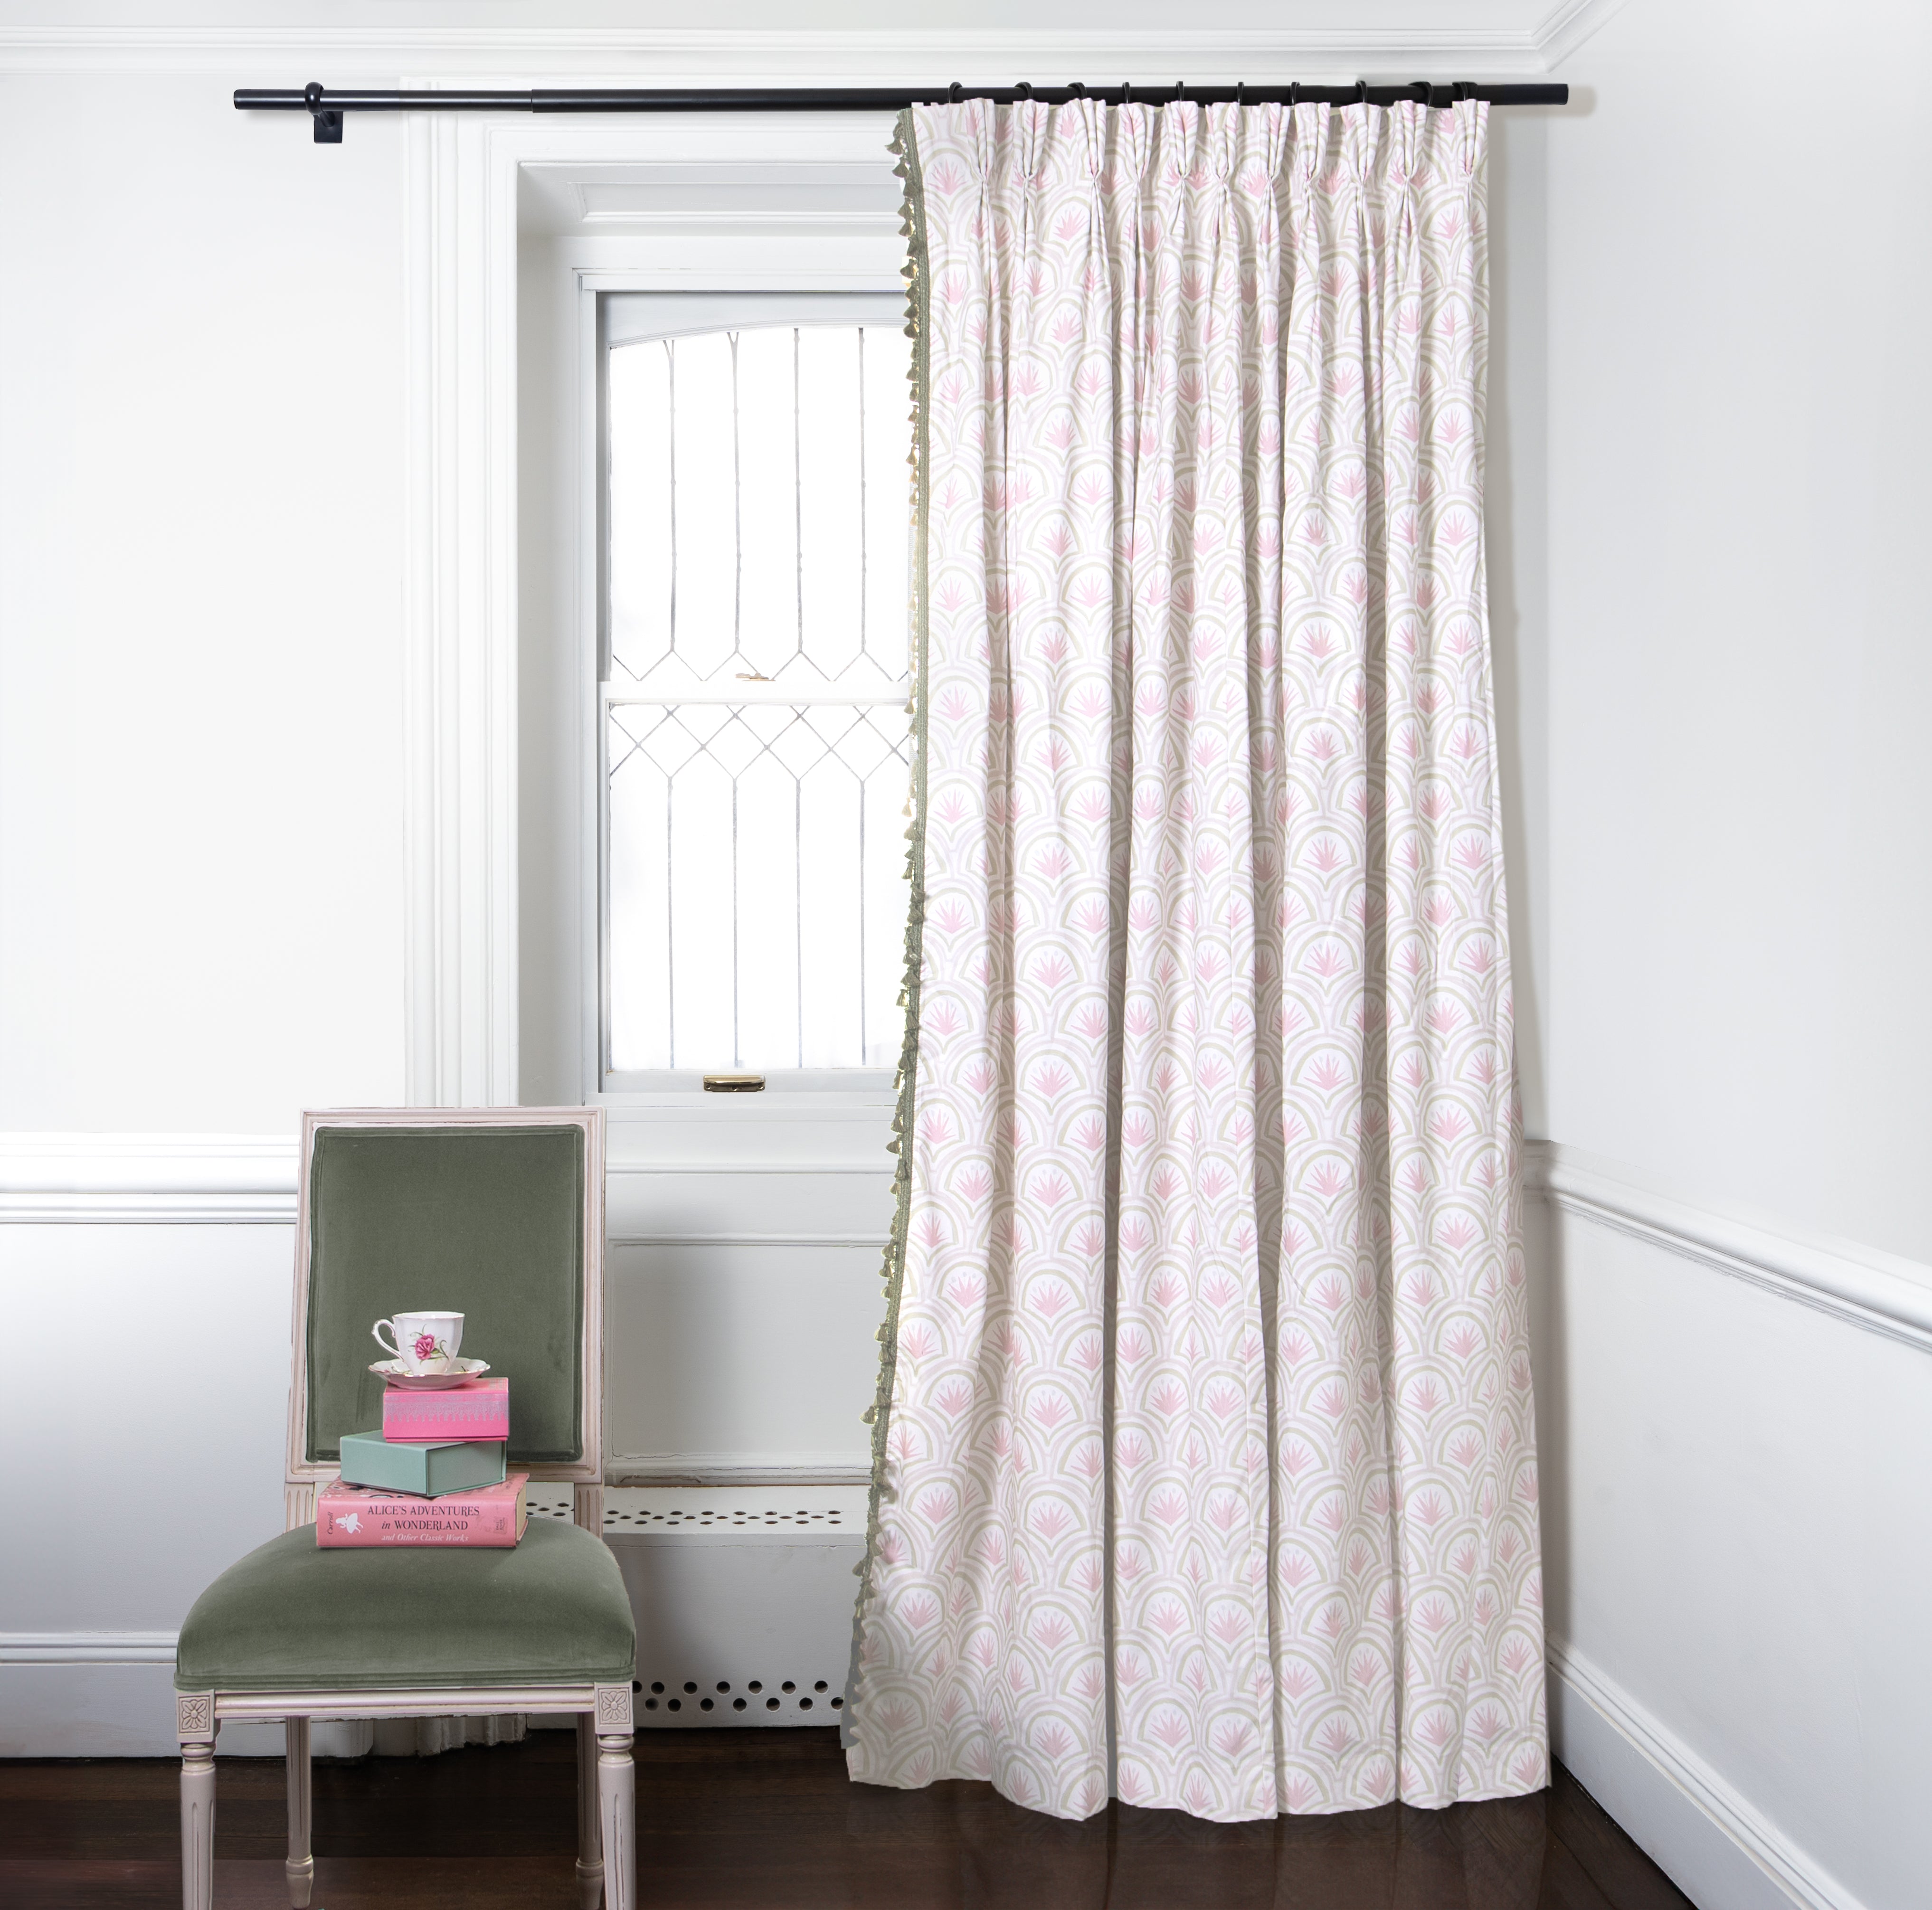 Curtainking Linen Textured Curtains 96 inch Cream White Bedroom Living Room  Window Curtain Set Light Filtering Drapes Grommet Top 2 Panels - Walmart.com